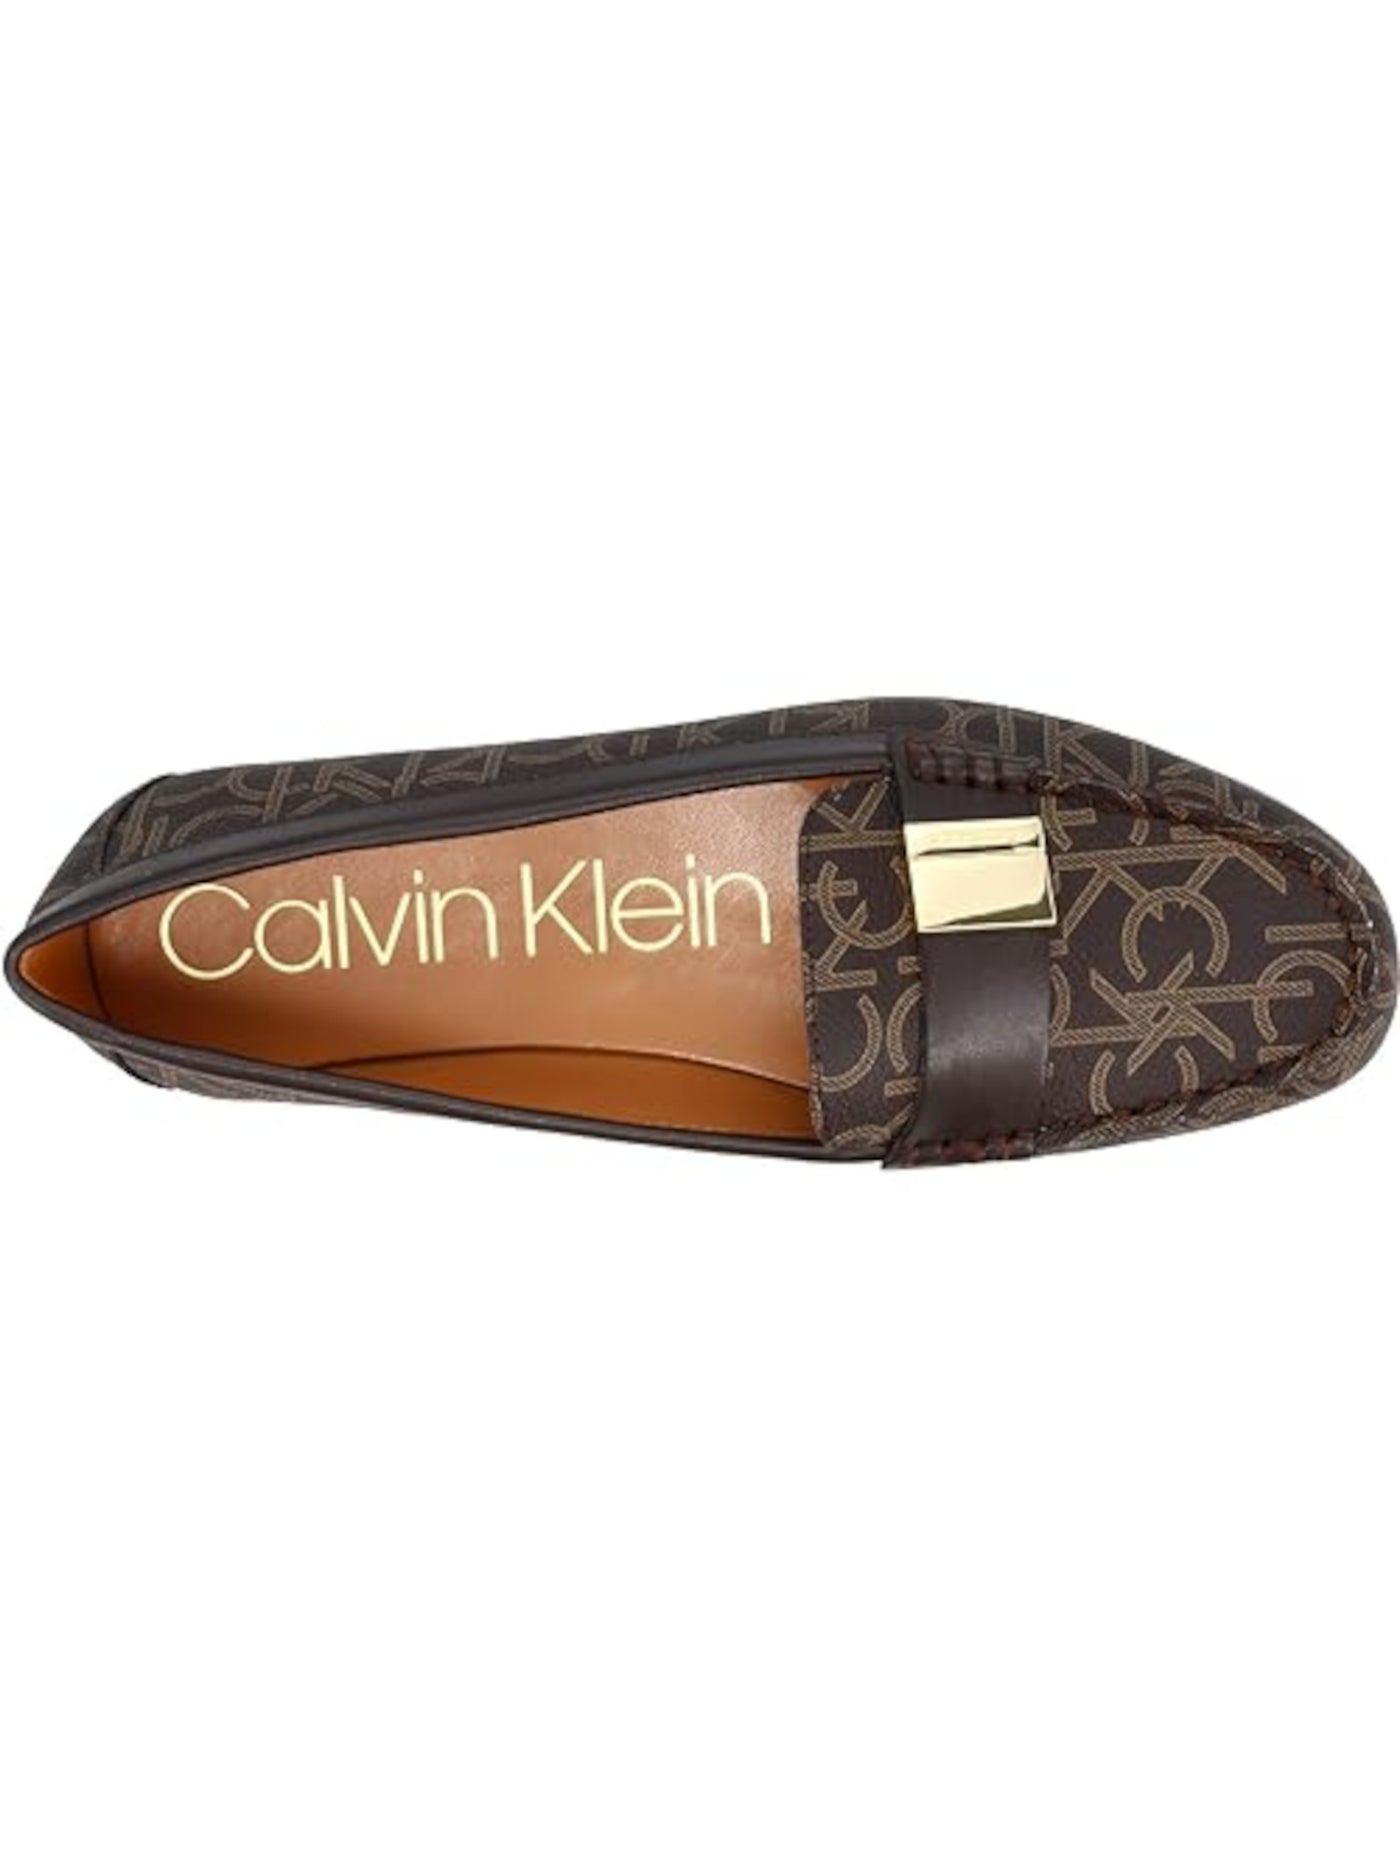 CALVIN KLEIN Womens Brown Logo Moc Toe Hardware Padded Lisa Round Toe Slip On Loafers Shoes 9.5 M